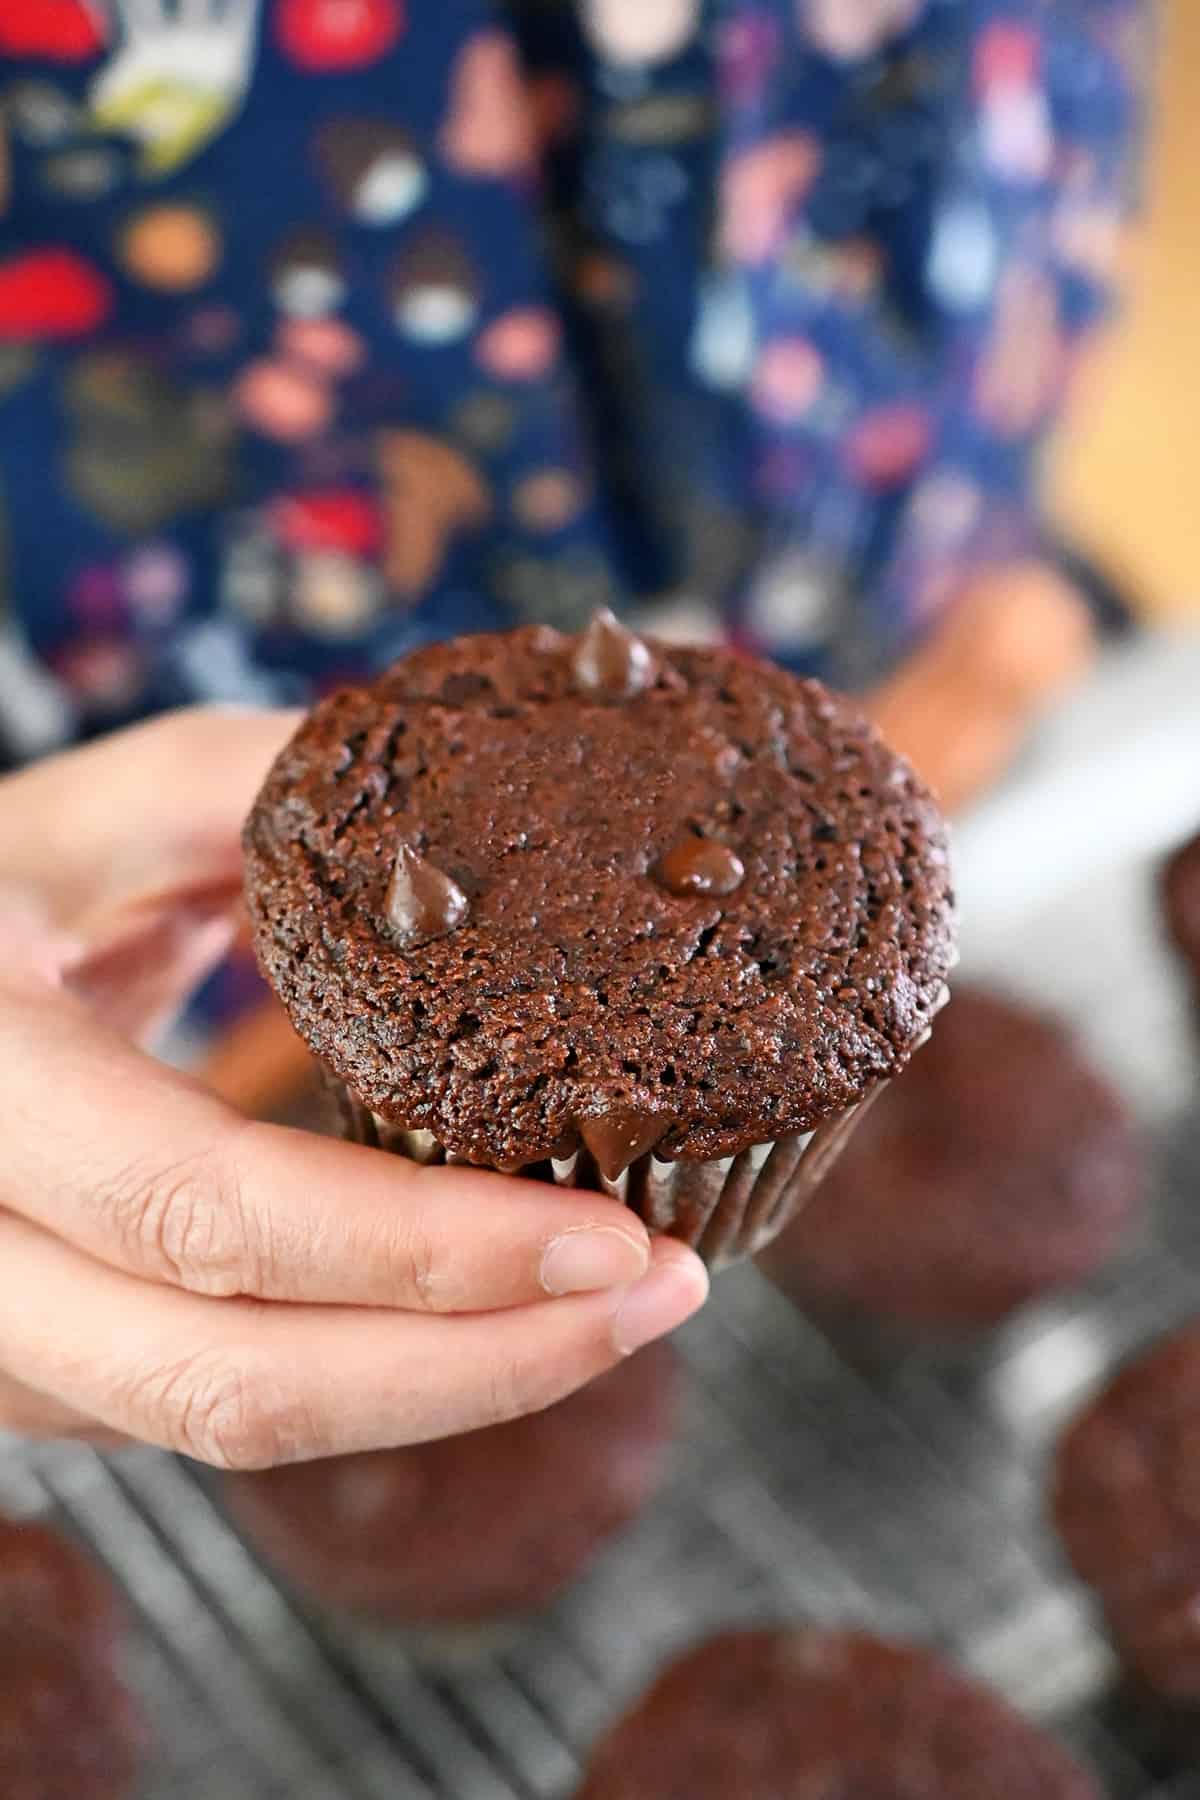 A hand is holding a paleo and gluten free chocolate zucchini muffin.